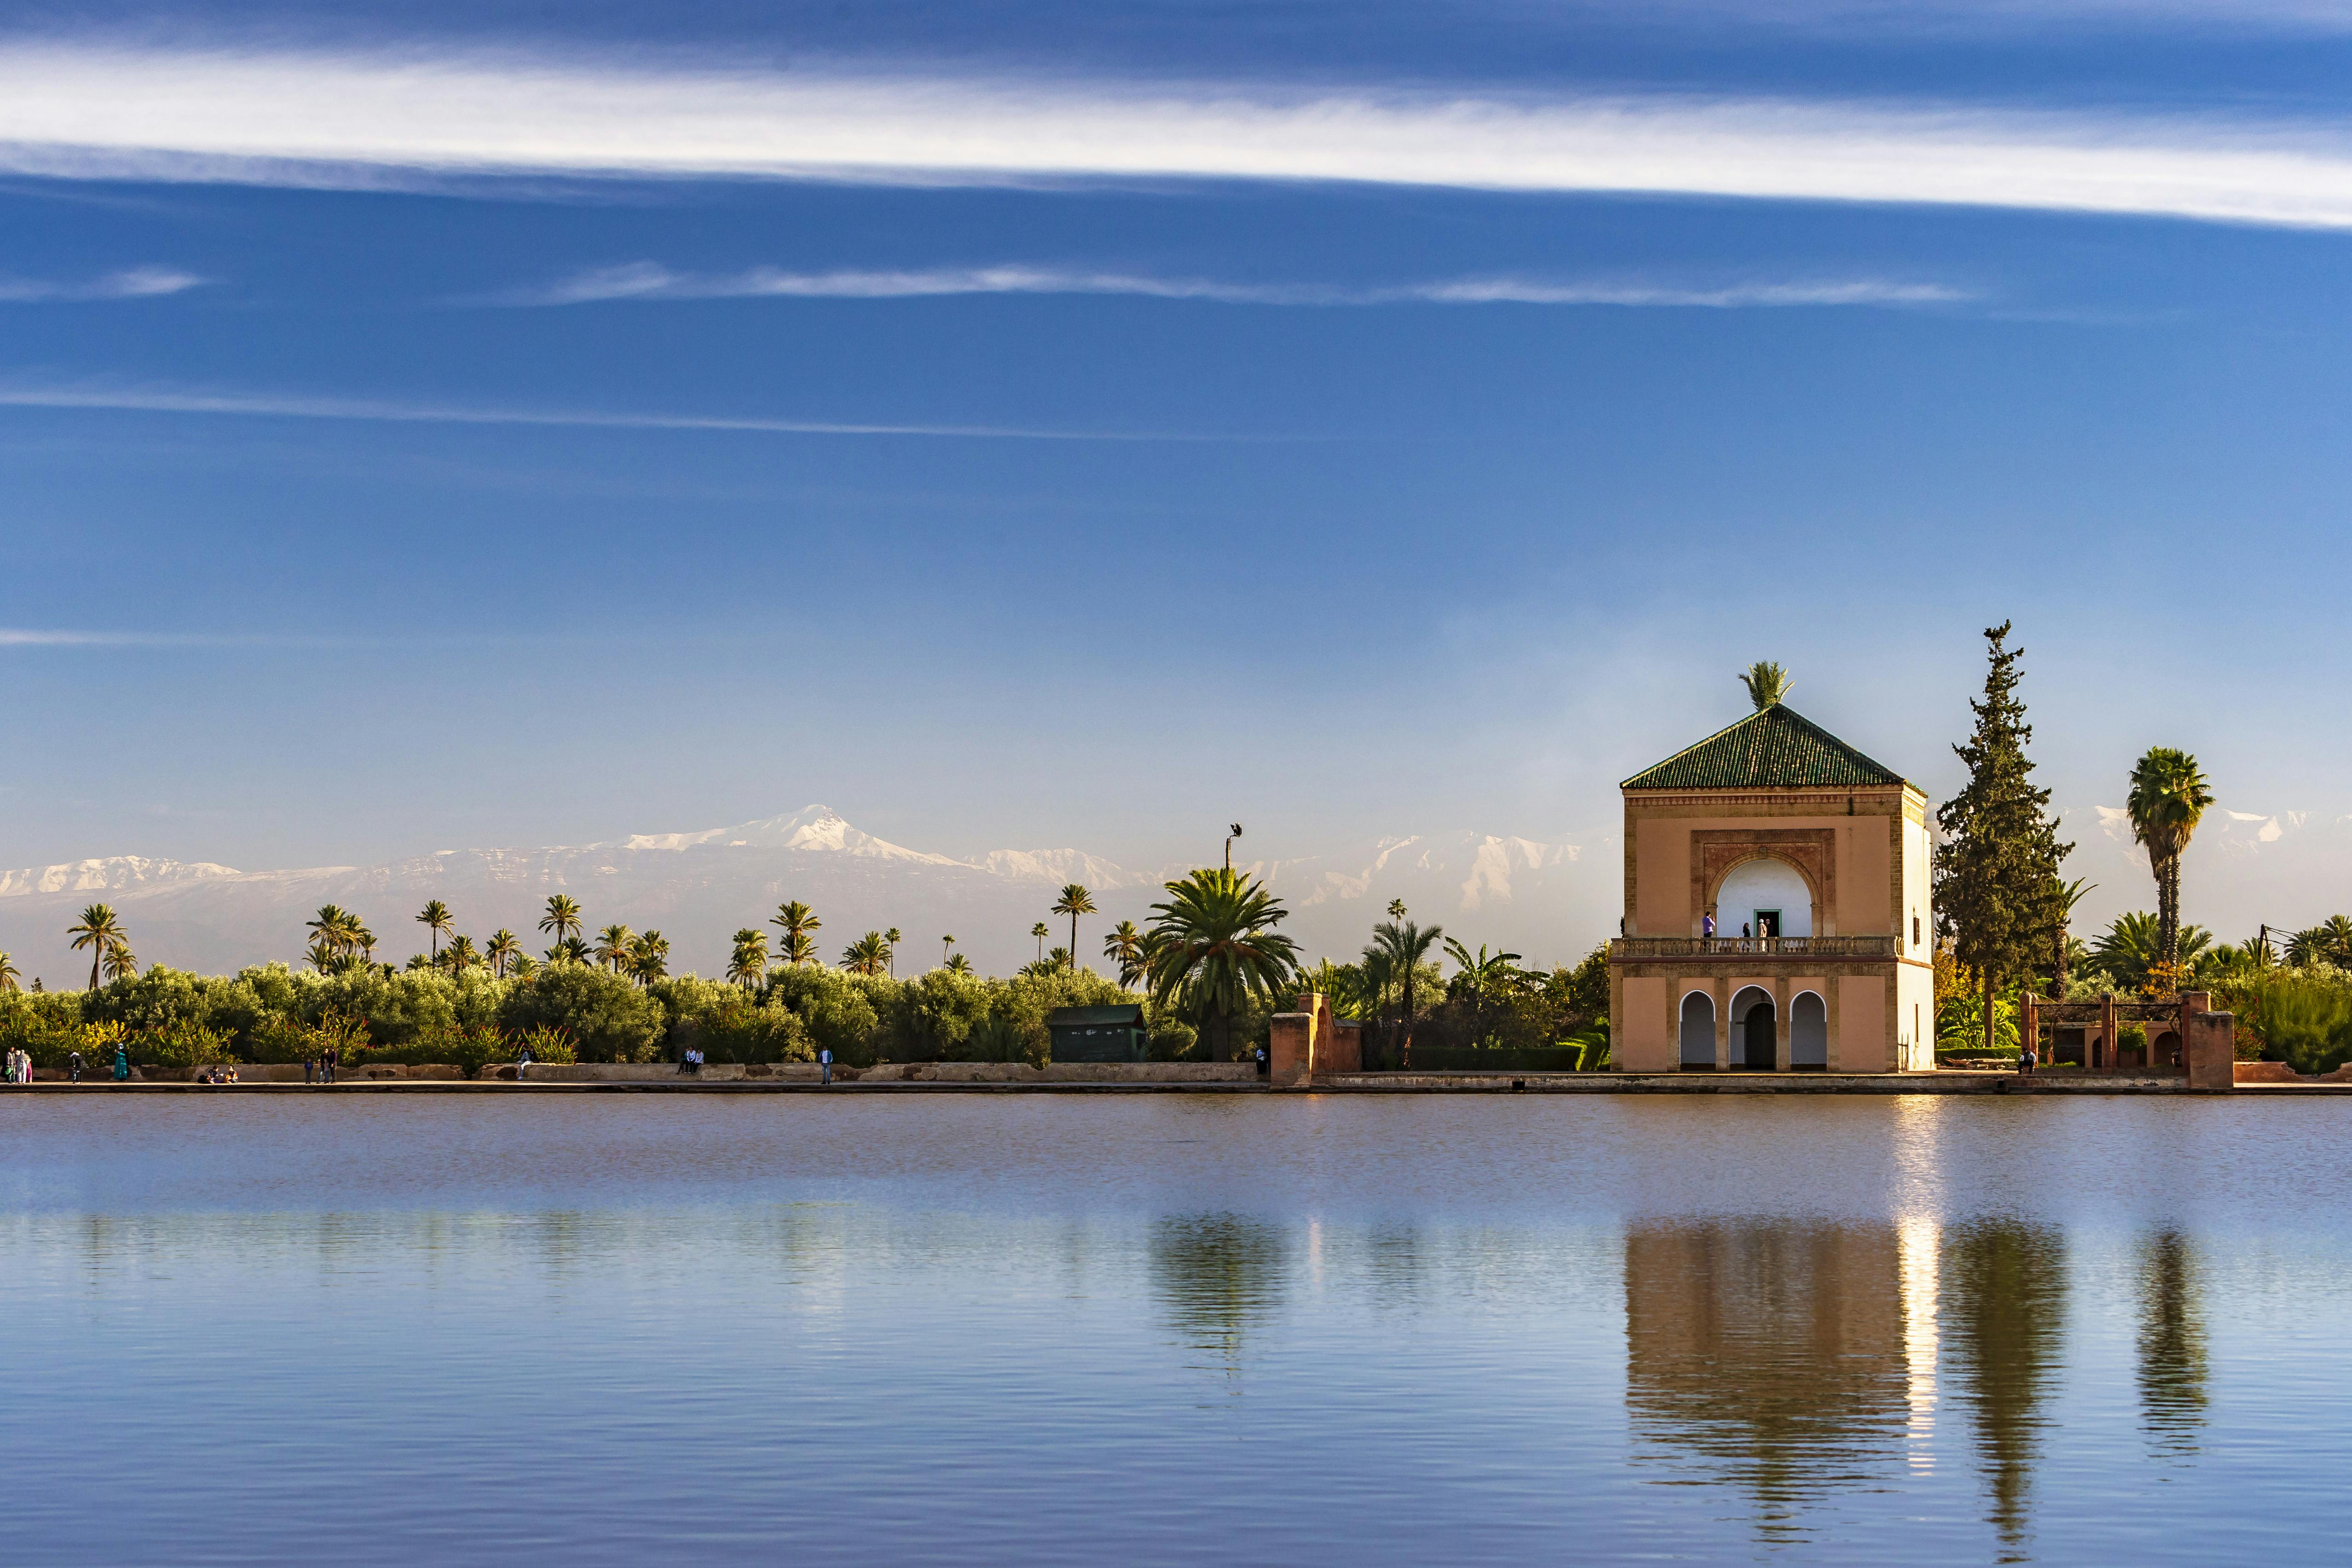 Guided tour of places and monuments in Marrakech